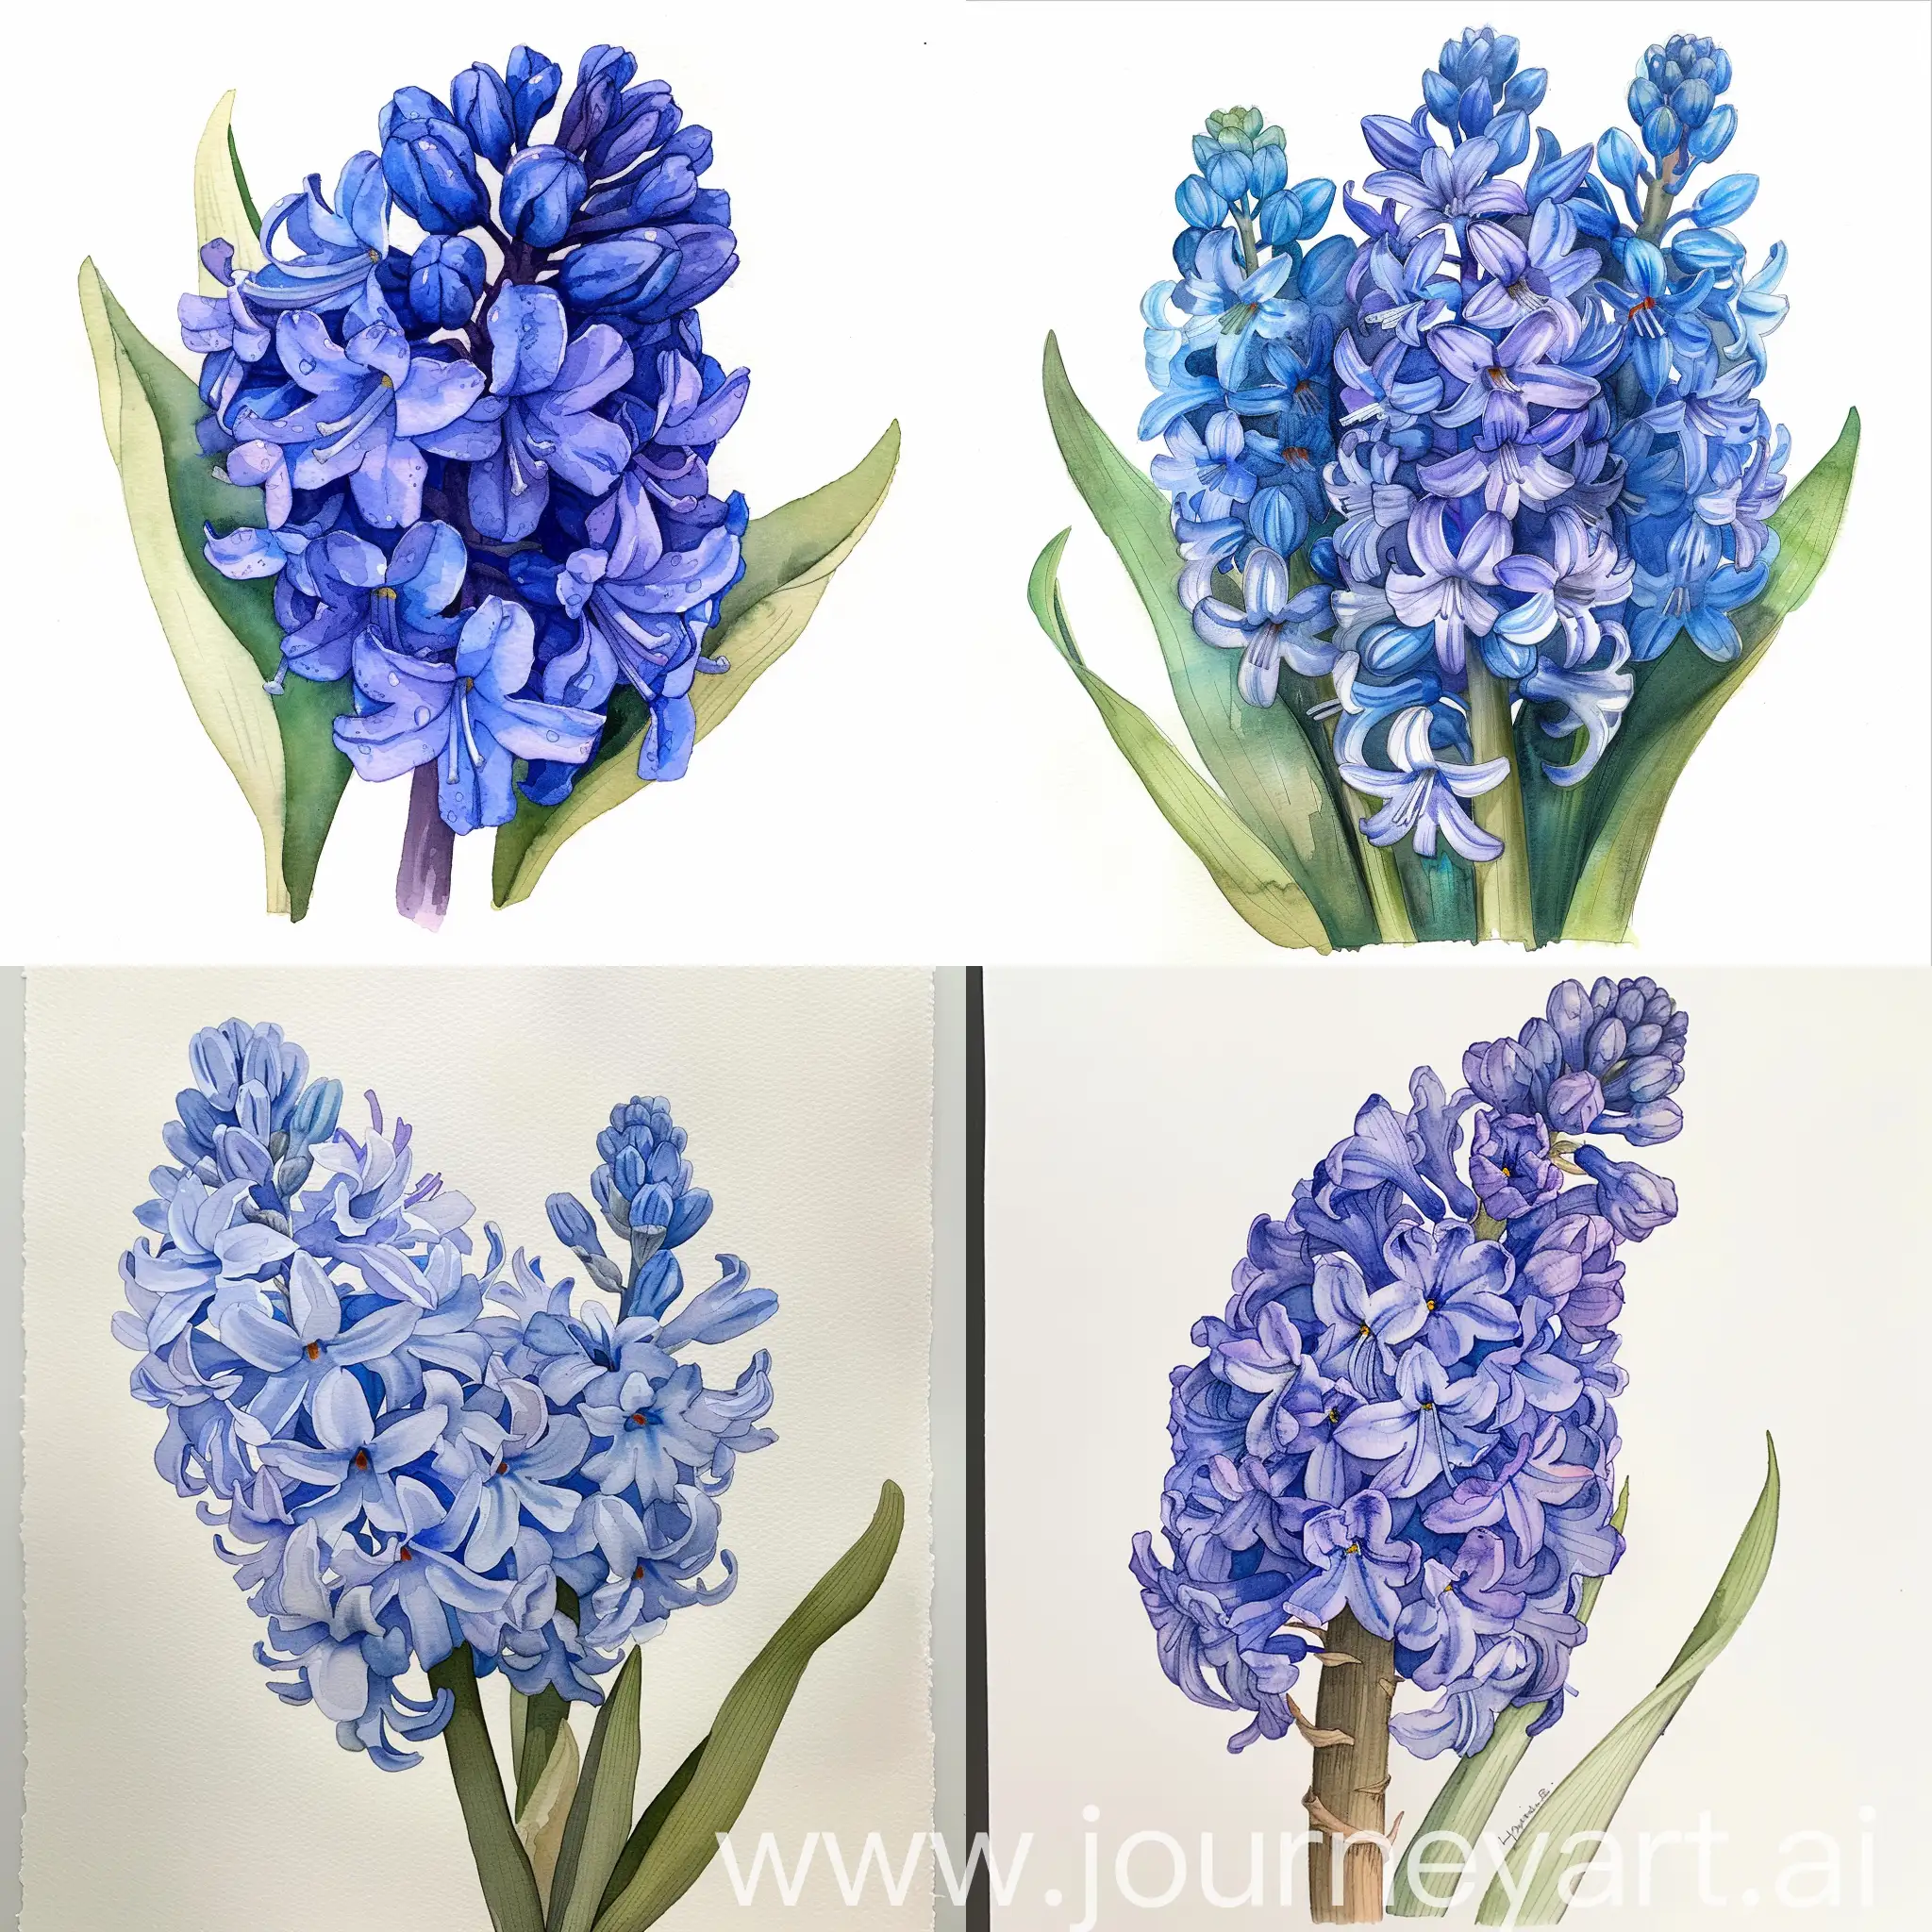 Hyacinth-Watercolor-Sketch-Vibrant-Floral-Artwork-with-Soft-Watercolor-Effect